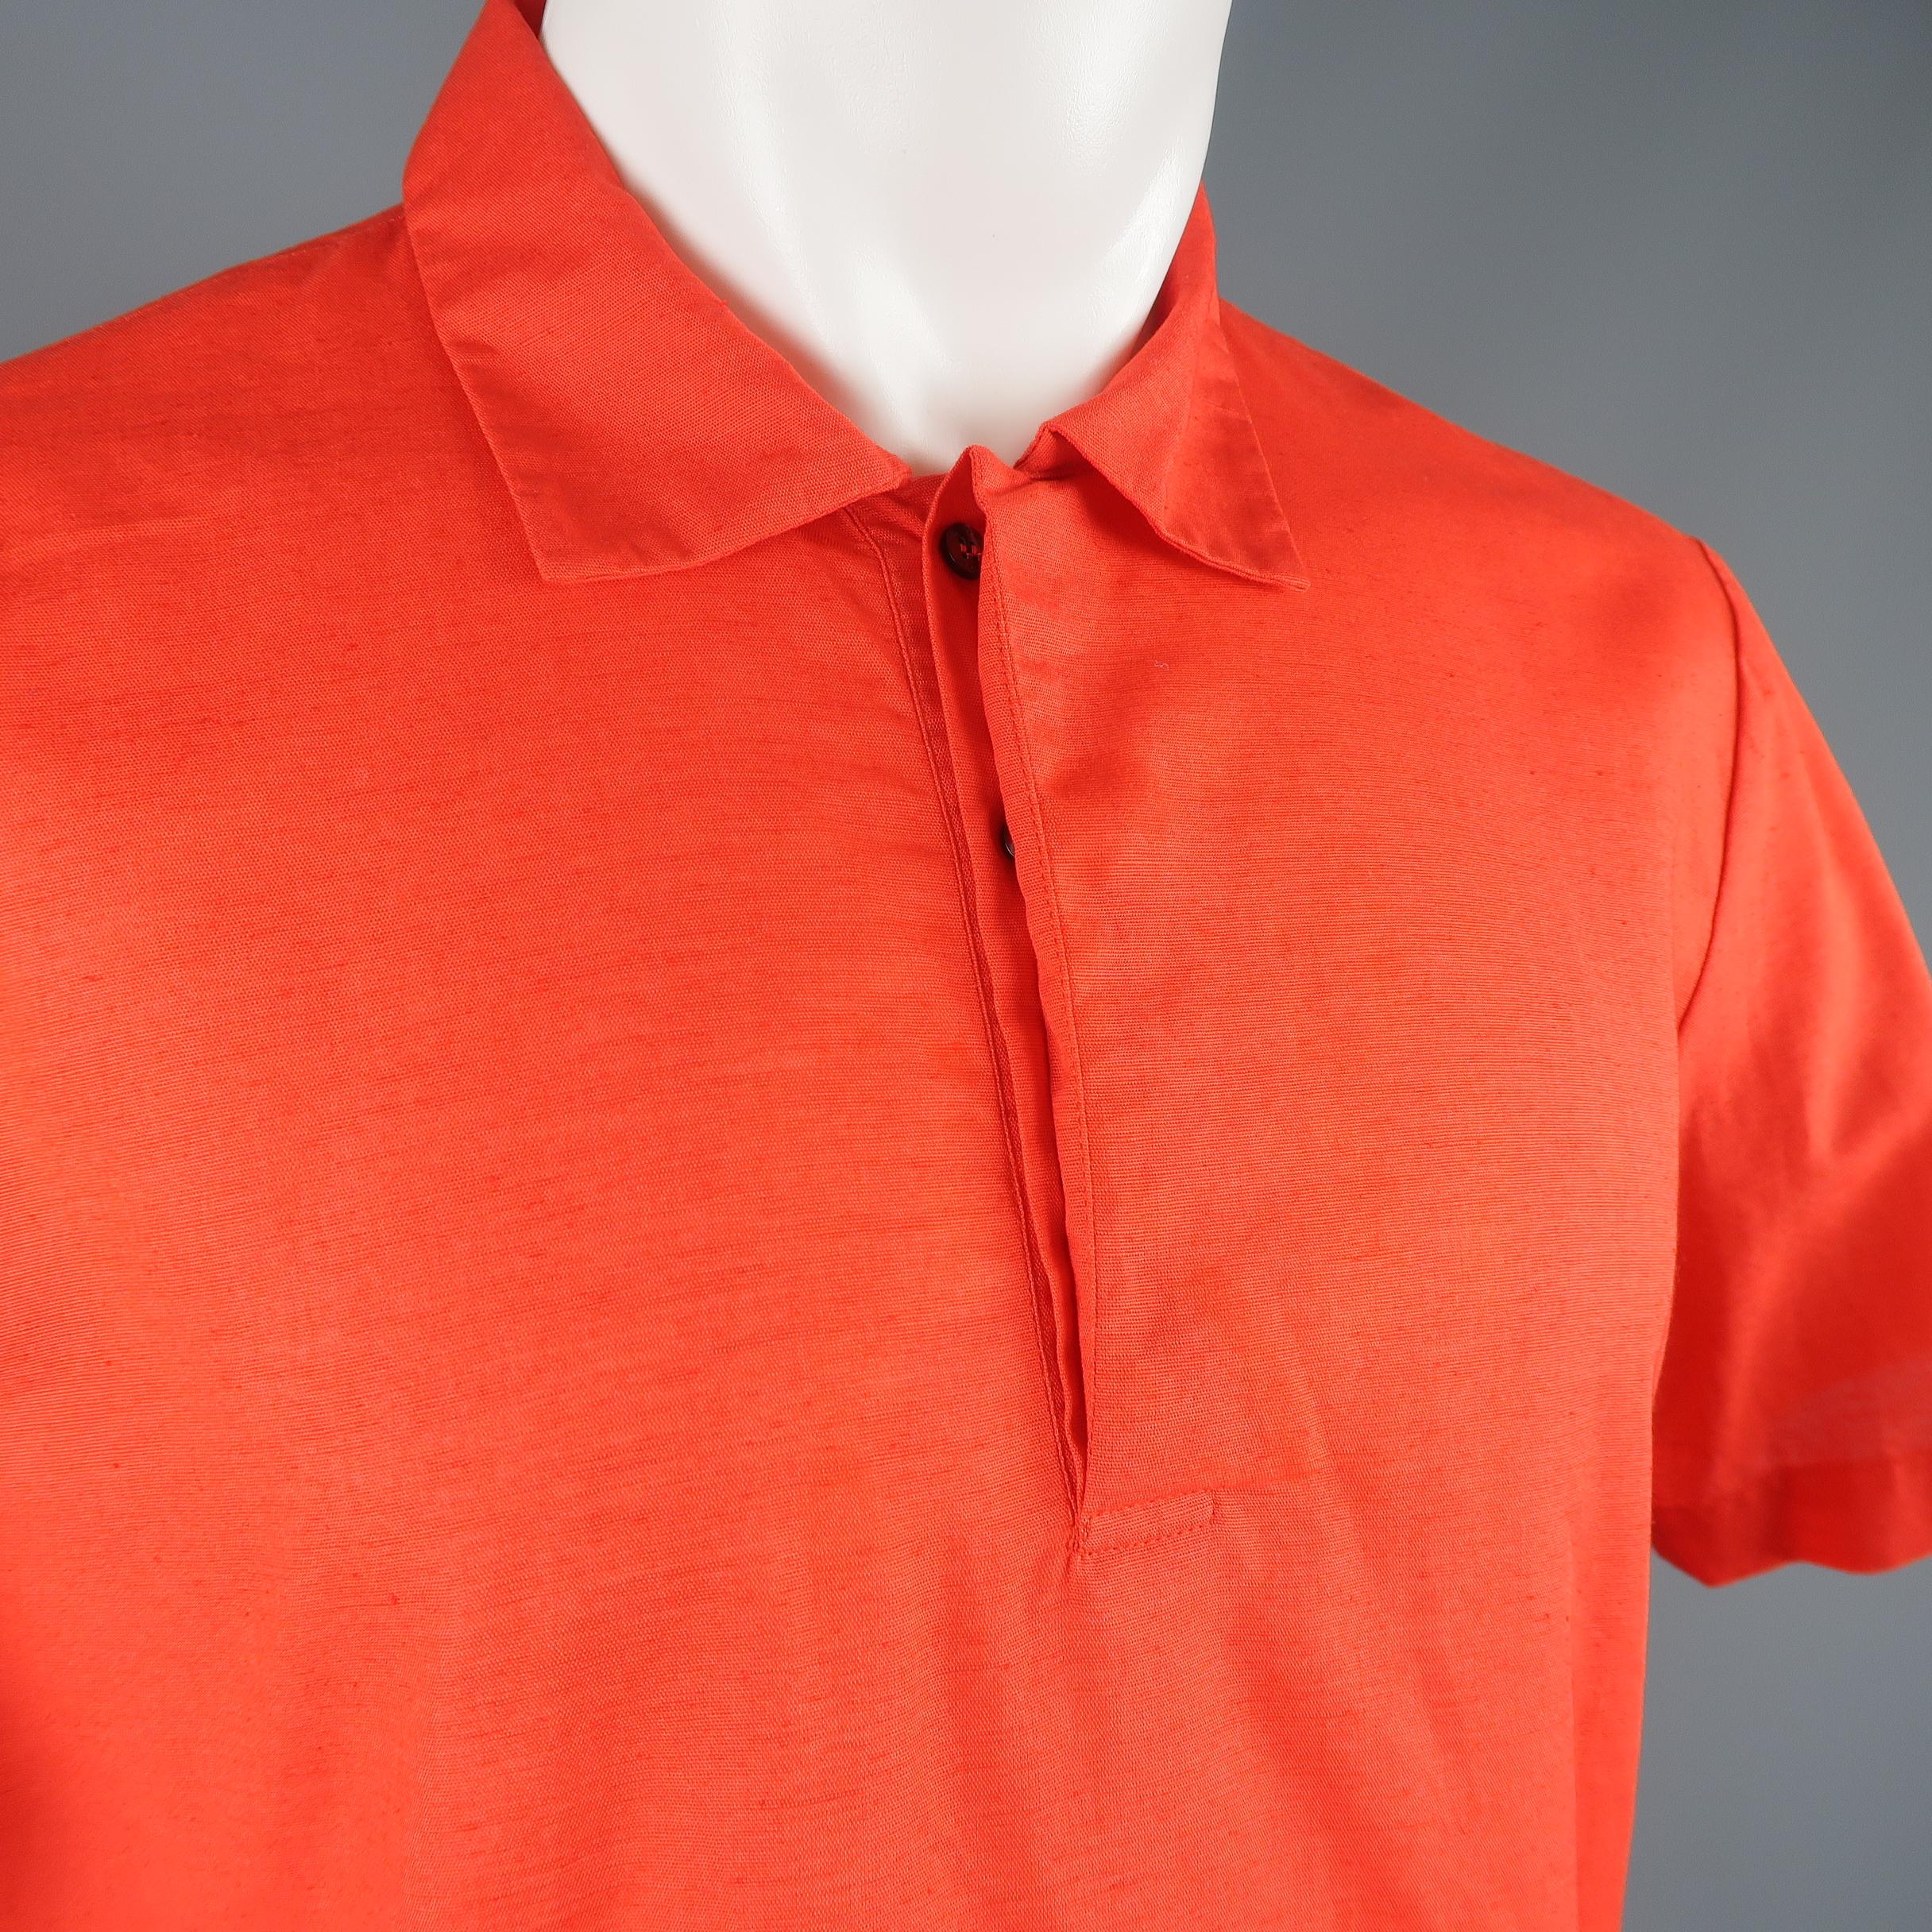 MSGM shirt comes in bright red cotton linen blend fabric with a pointed collar, short sleeves, and half button polo style closure with placket. Made in Italy.
 
Excellent Pre-Owned Condition.
Marked: IT 50
 
Measurements:
 
Shoulder: 18 in.
Chest: